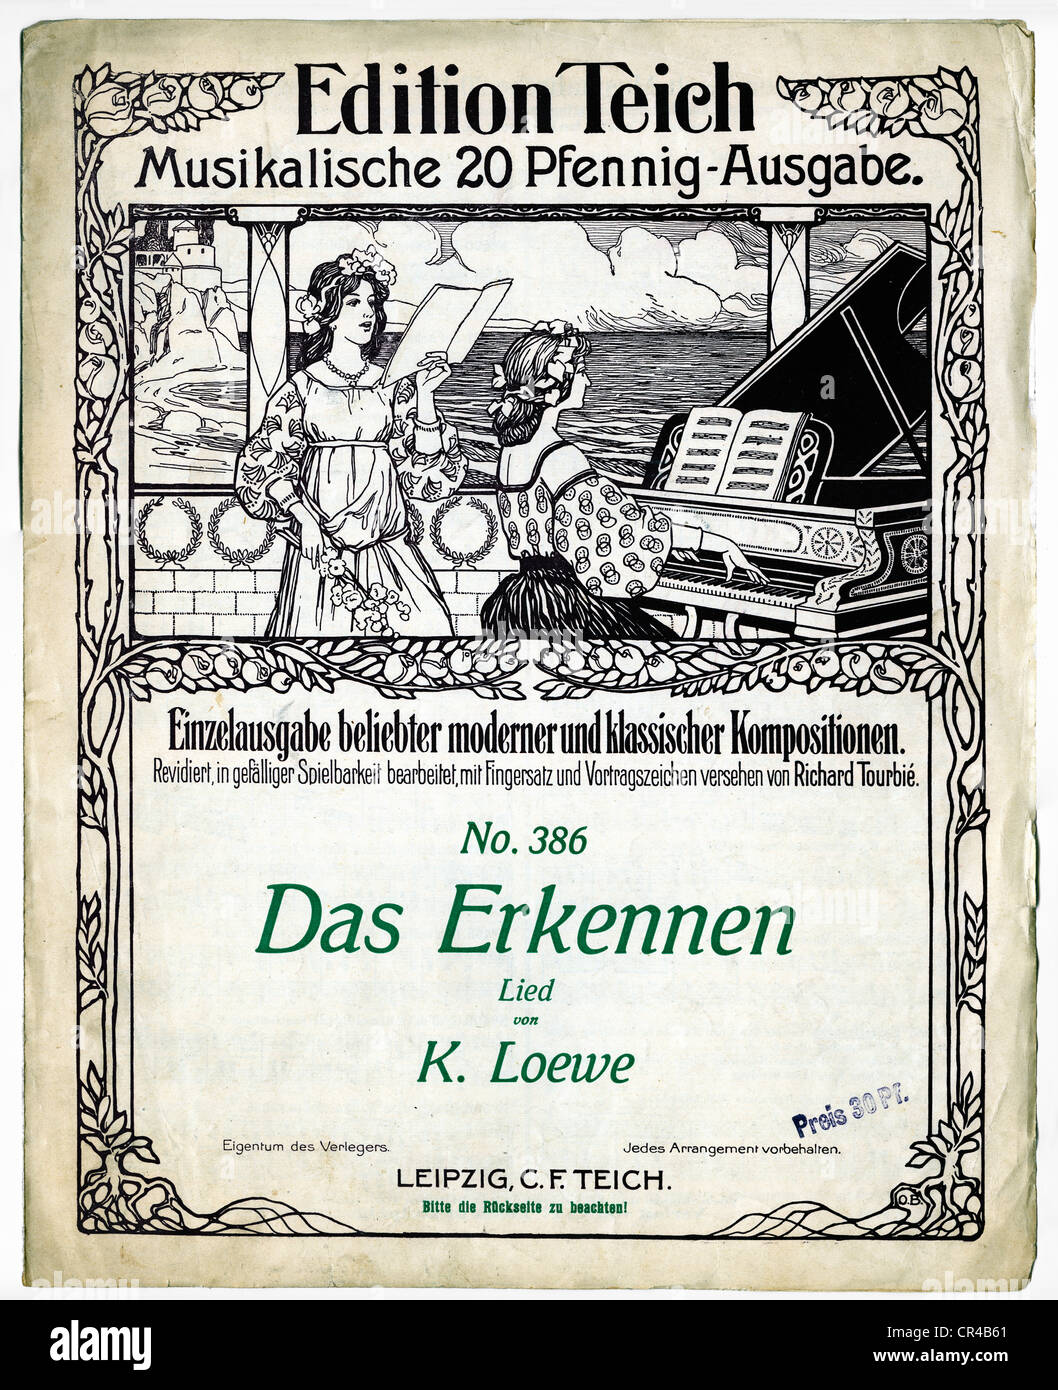 Das Erkennen, The Recognition, song by K. Loewe, historical sheetmusic from circa 1900, C. F. Teich music publishing house Stock Photo